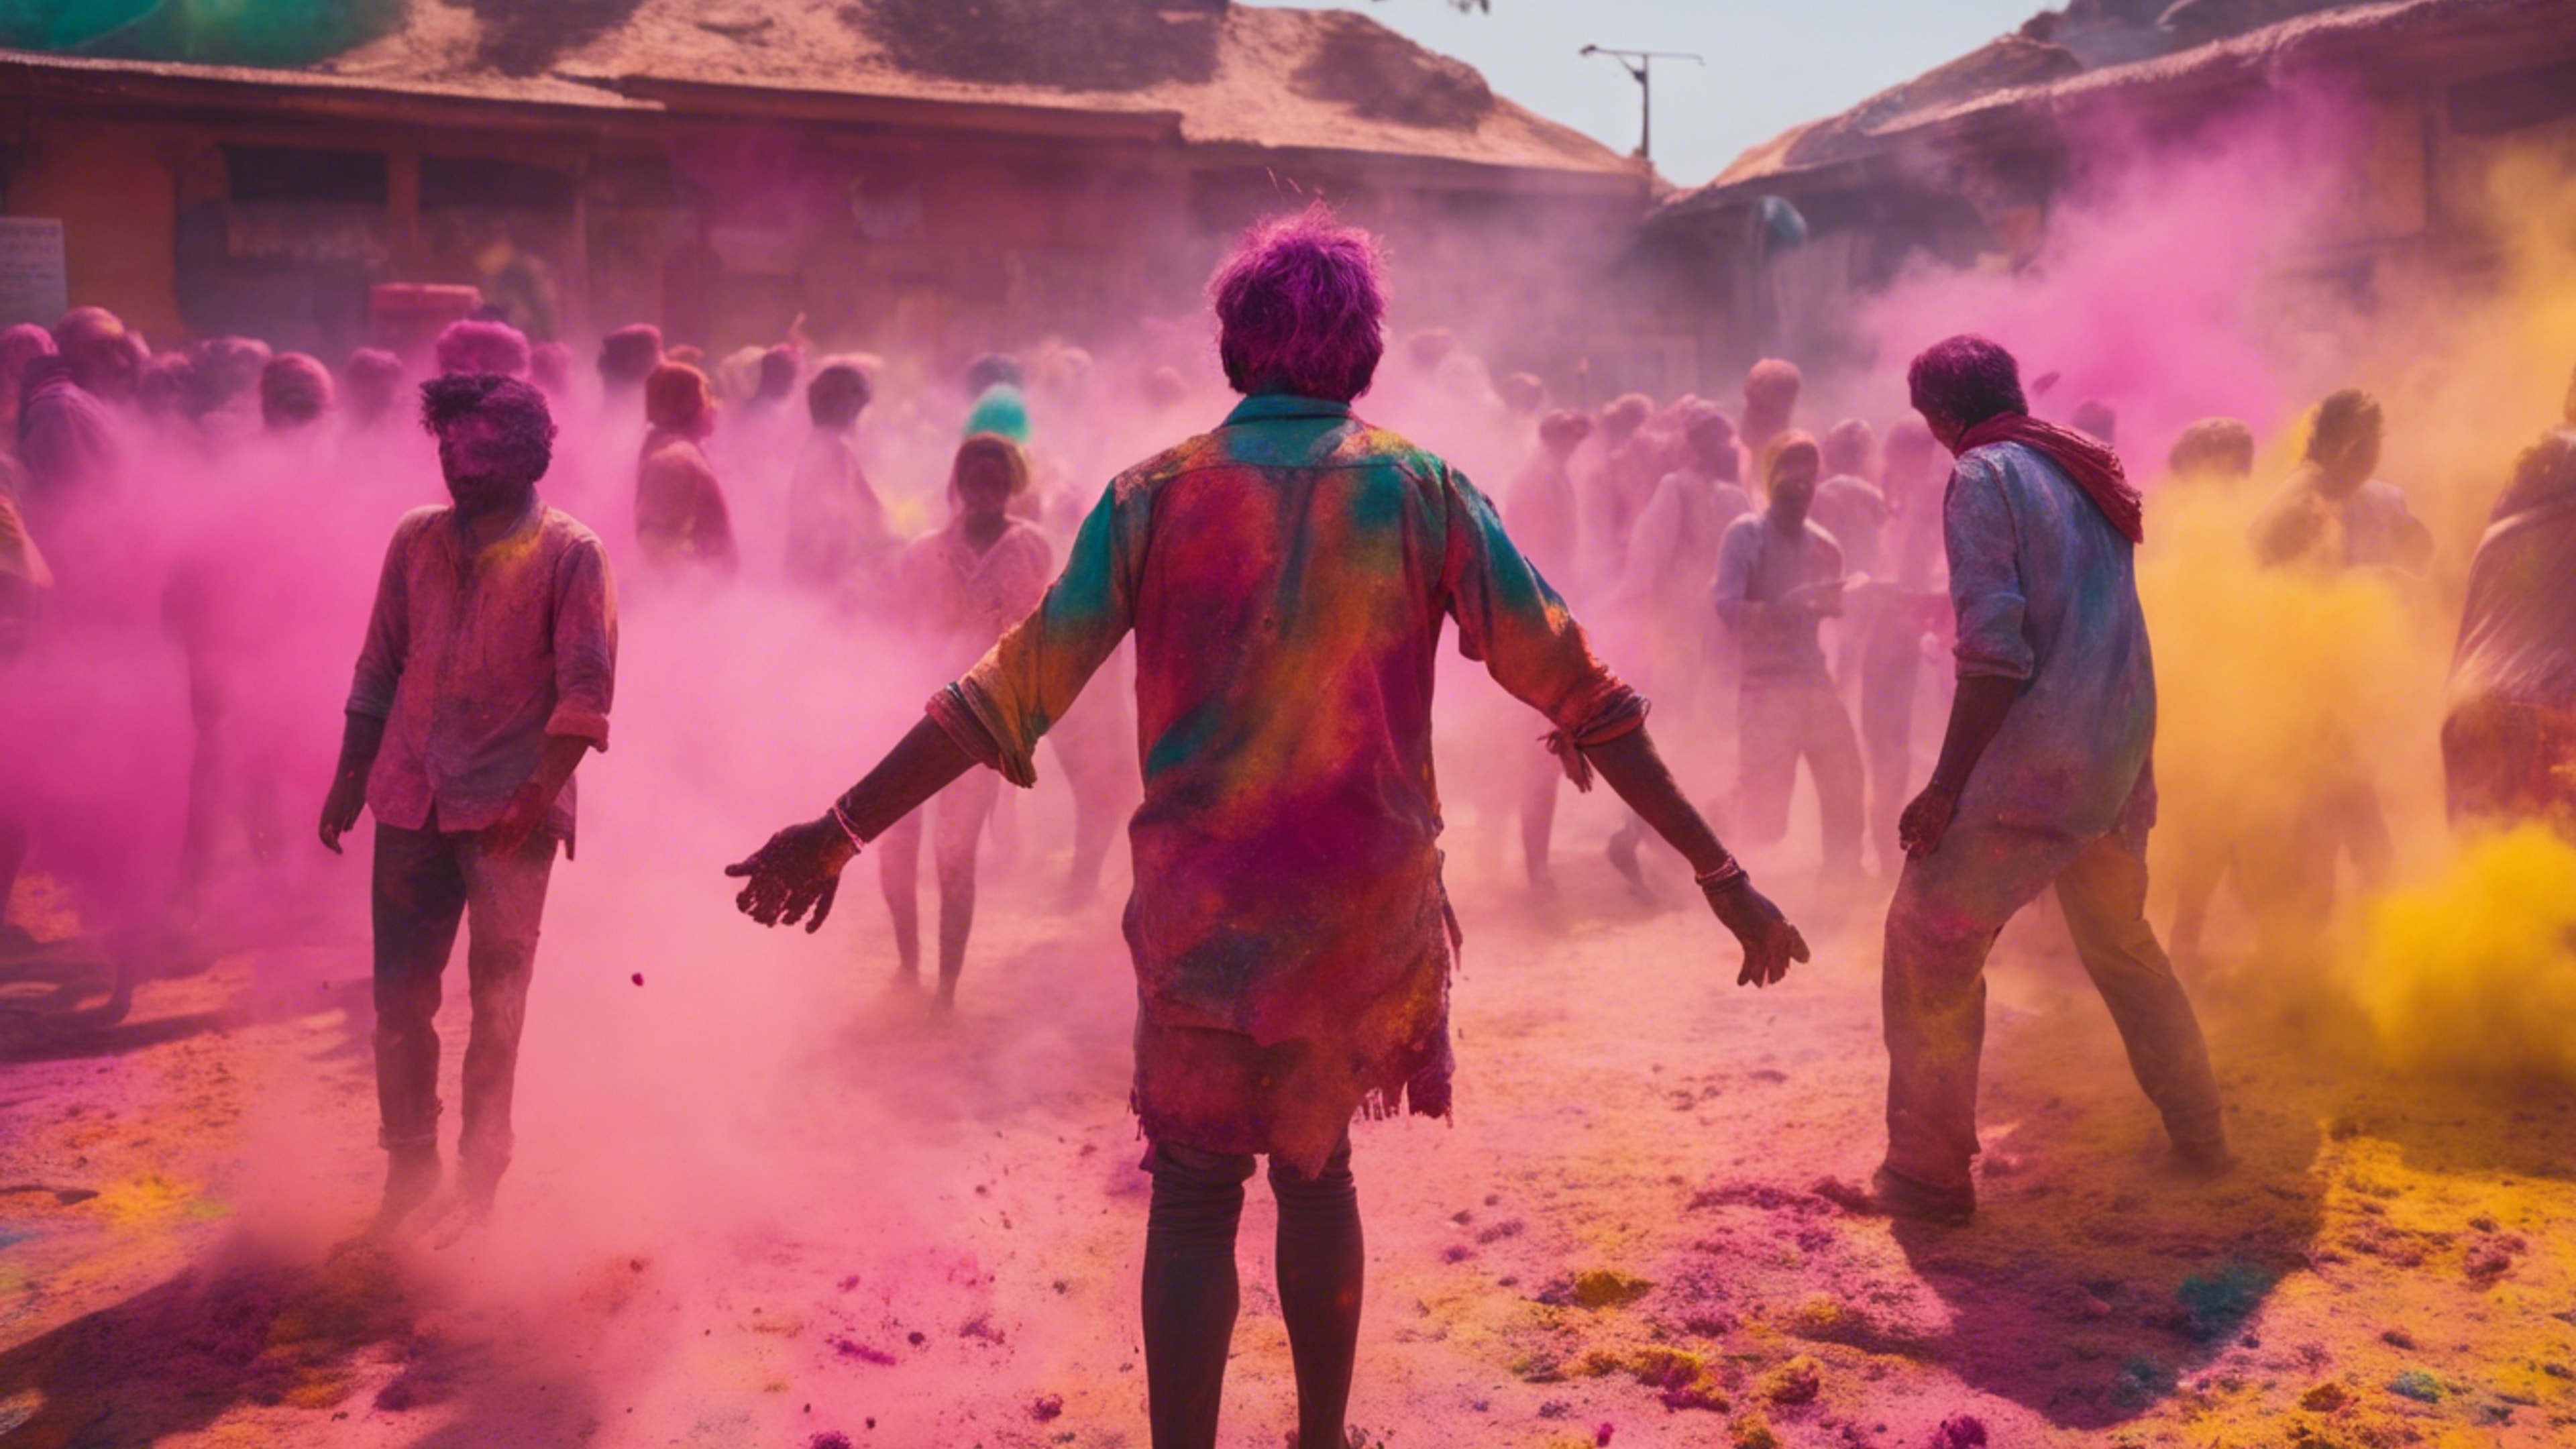 A vibrant and colorful Holi festival with people throwing powdered colors and laughing in the backdrop of an old Indian city. Tapeta[6dae05cbdf264a67bd16]